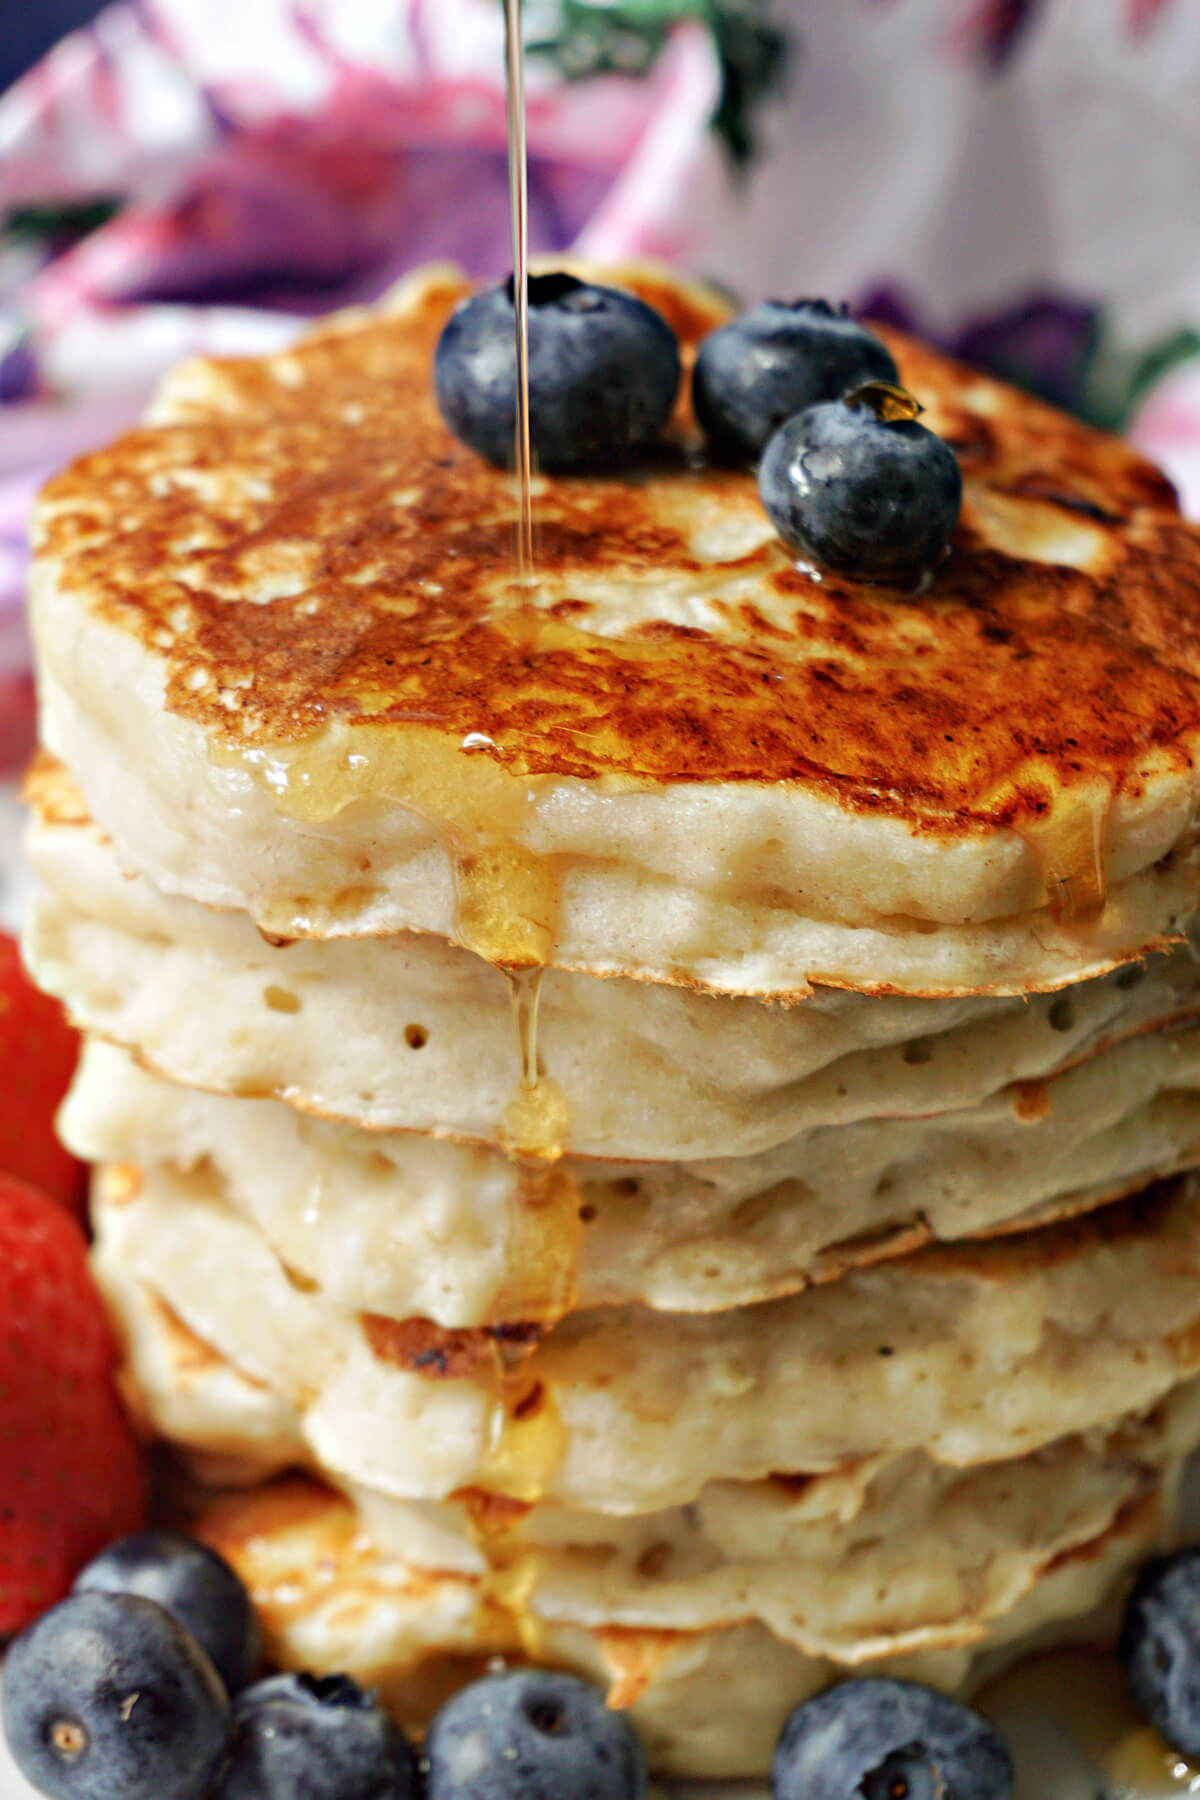 A pile of pancakes being drizzled with maple syrup and topped with blueberries.